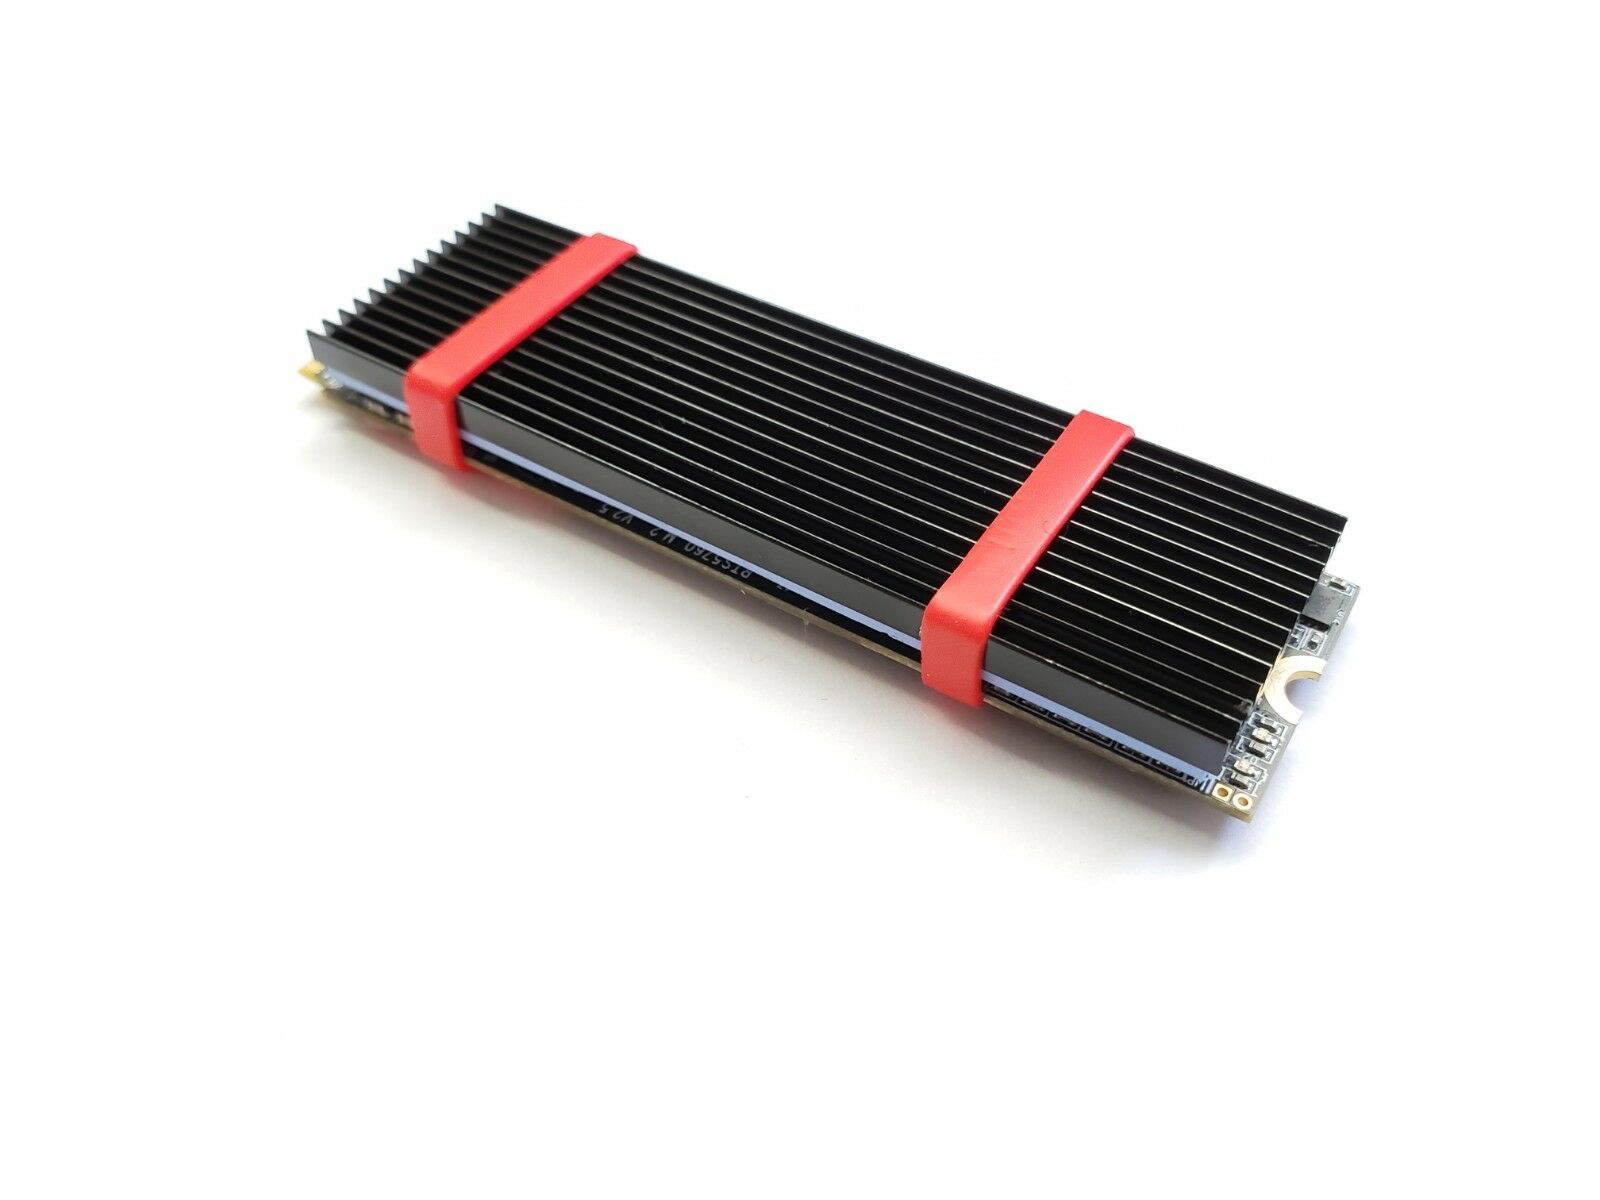 M.2 Ngff Nvme 2280 Pcie Ssd Aluminum Cooling Heat Sink With Thermal Pad (black)